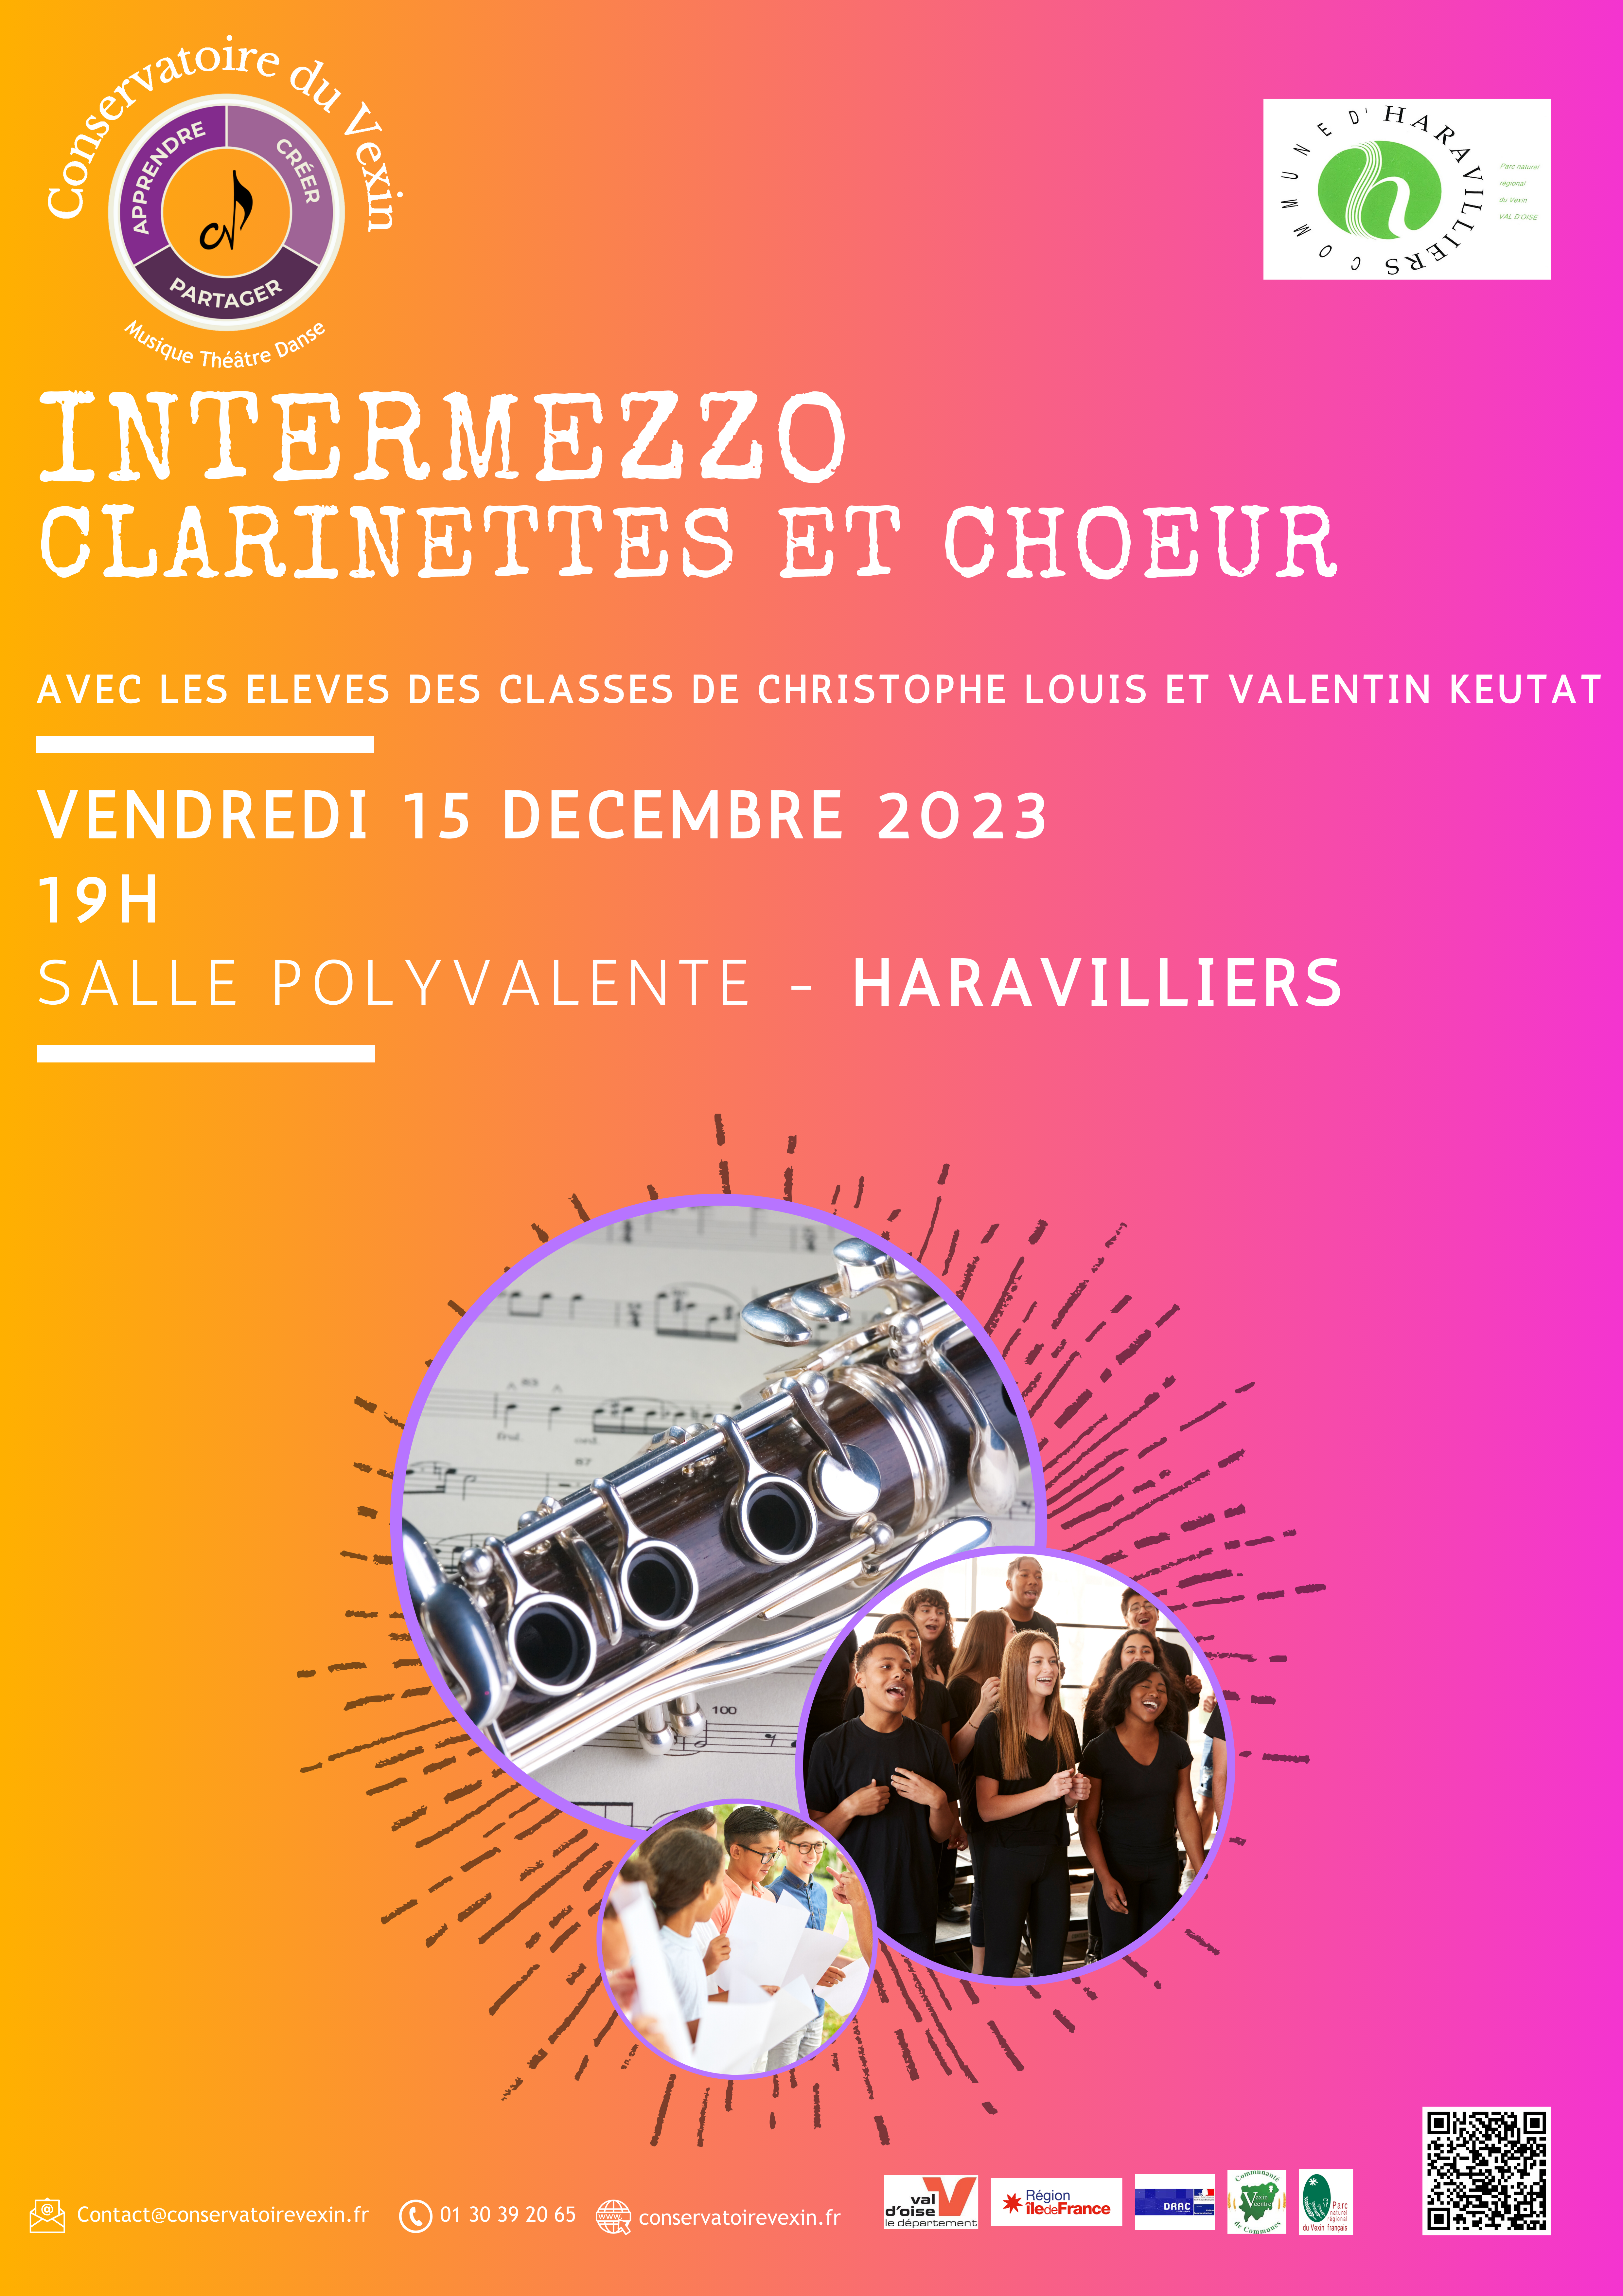 intermezzo clarinette choeur ados haravilliers 2023.png